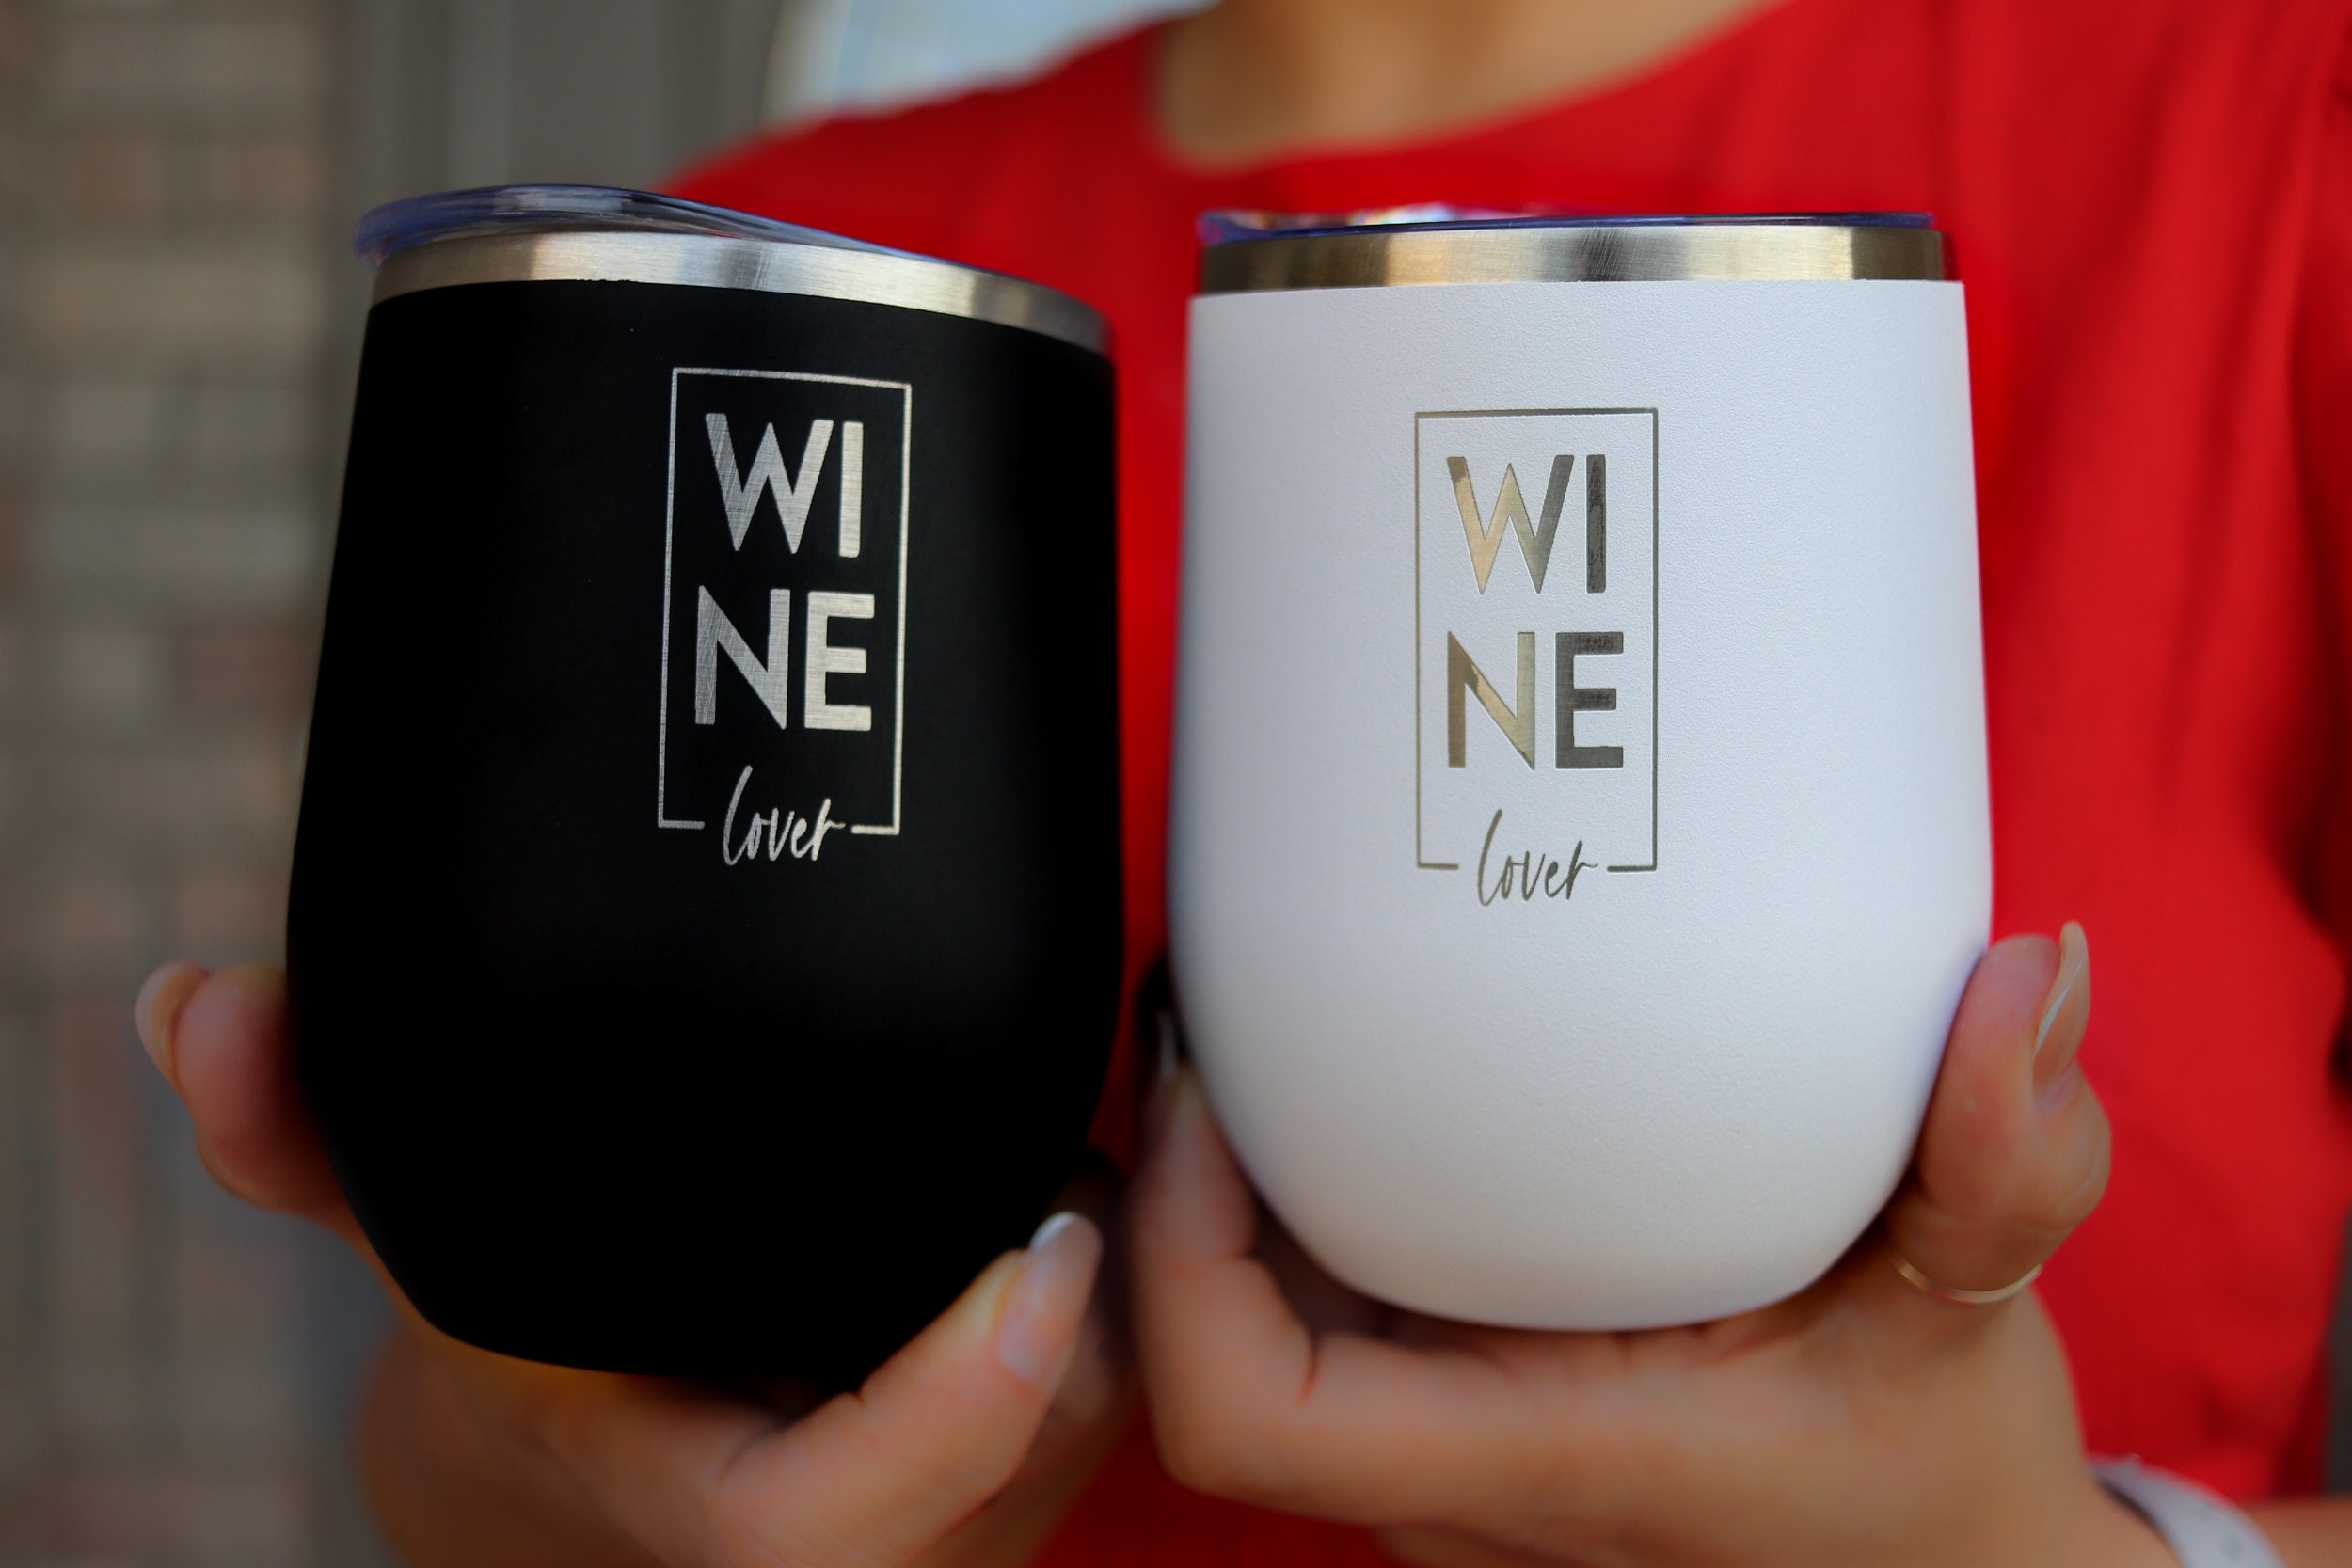 Engraved Stainless Steel Wine Tumblers - Set of 2 Wine Lover Gift - Home Wet Bar